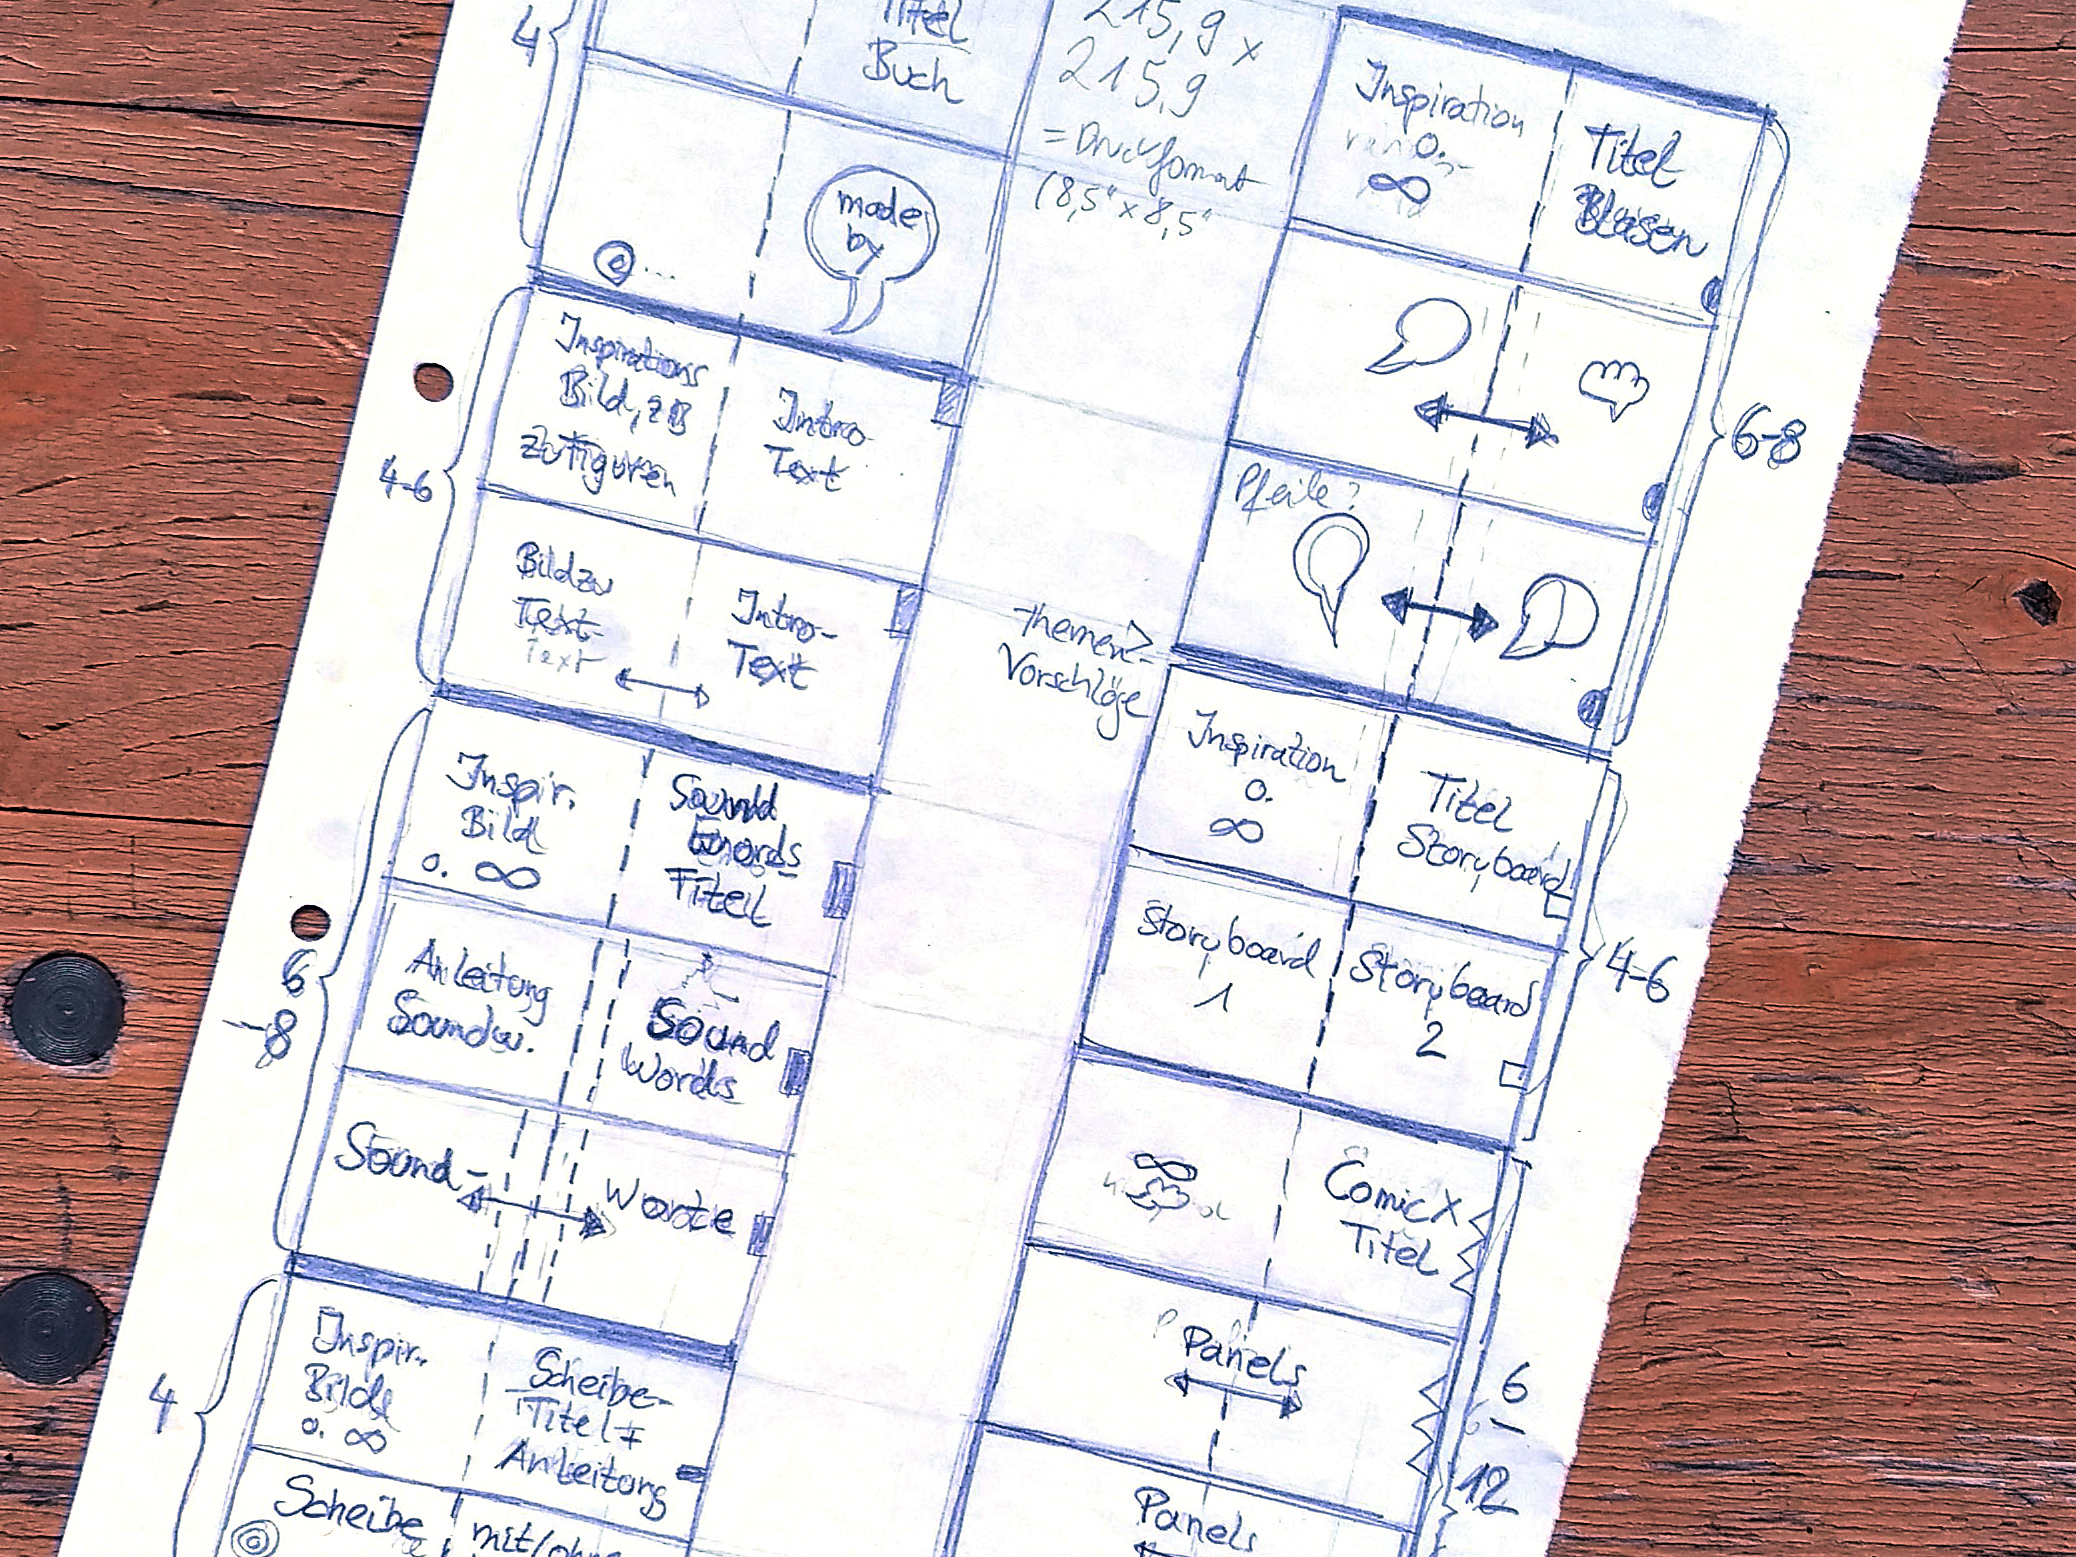 The storyboard for the comic book